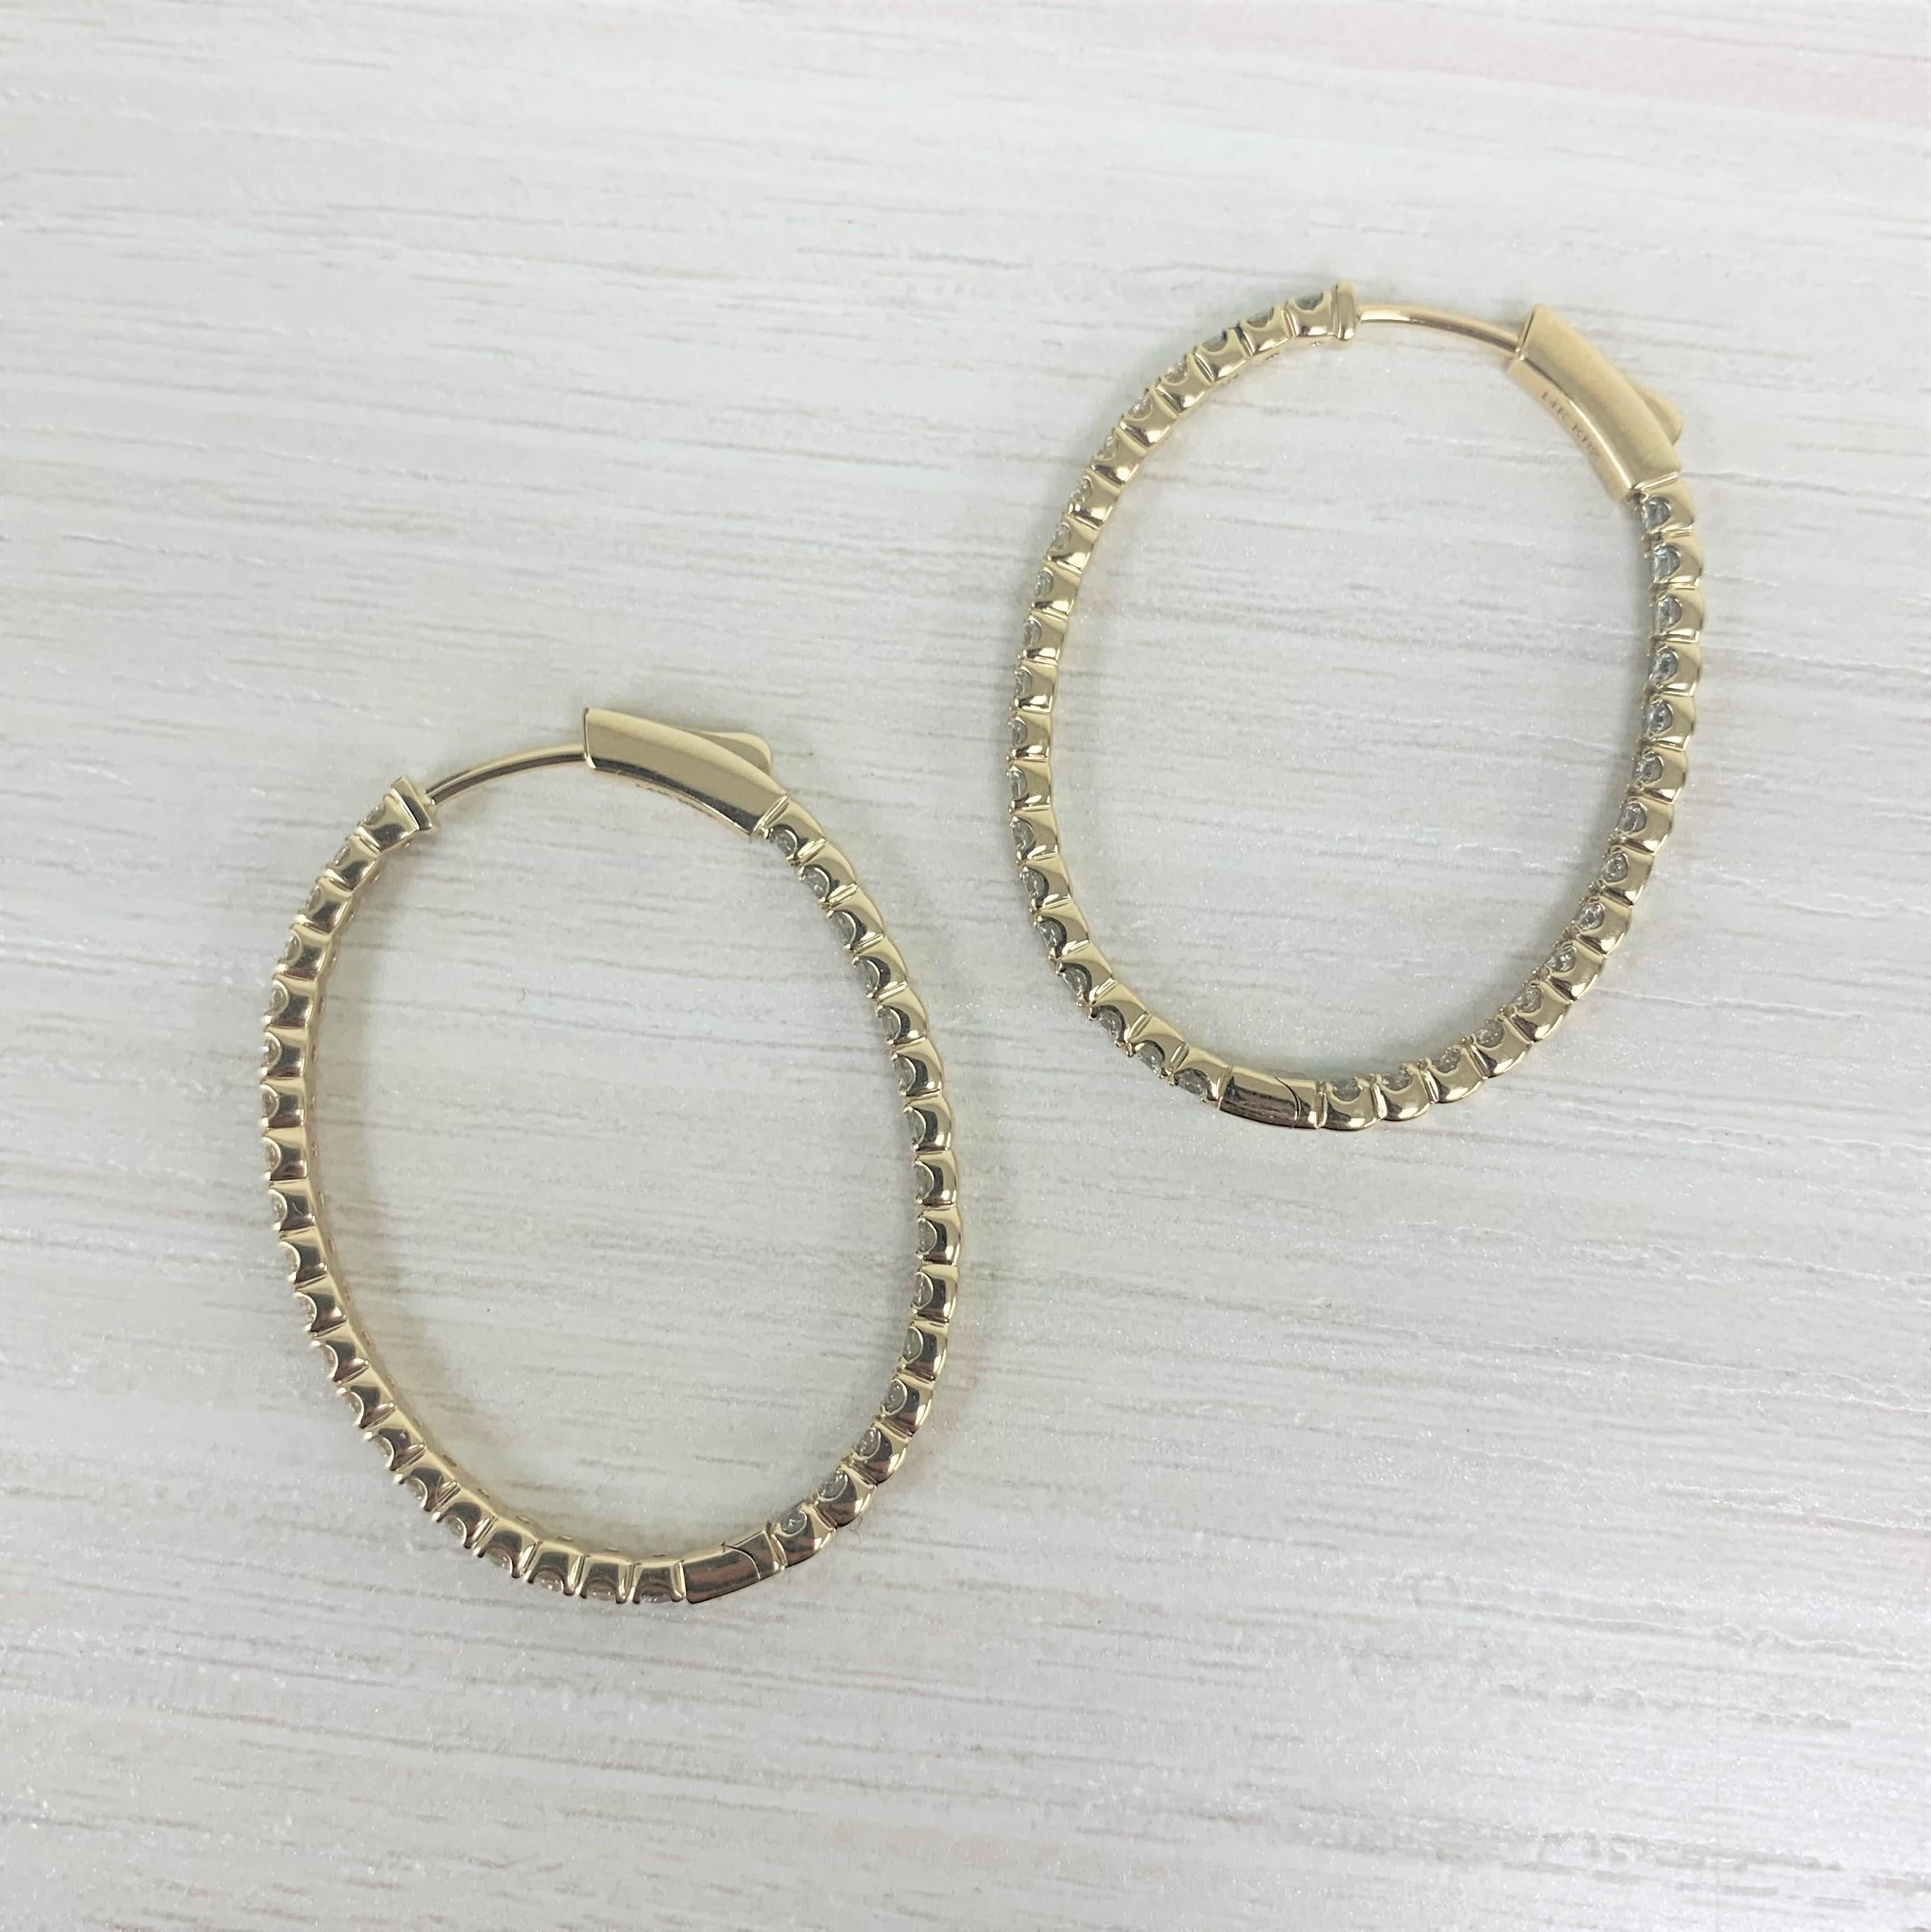 These Classic and Elegant Diamond Oval Hoop Earrings will frame your face beautifully! Crafted of 14K Yellow Gold these earrings feature approximately 2.28cts of Natural Round Diamonds. Diamond Color and Clarity is GH-SI1. Insert Latch for